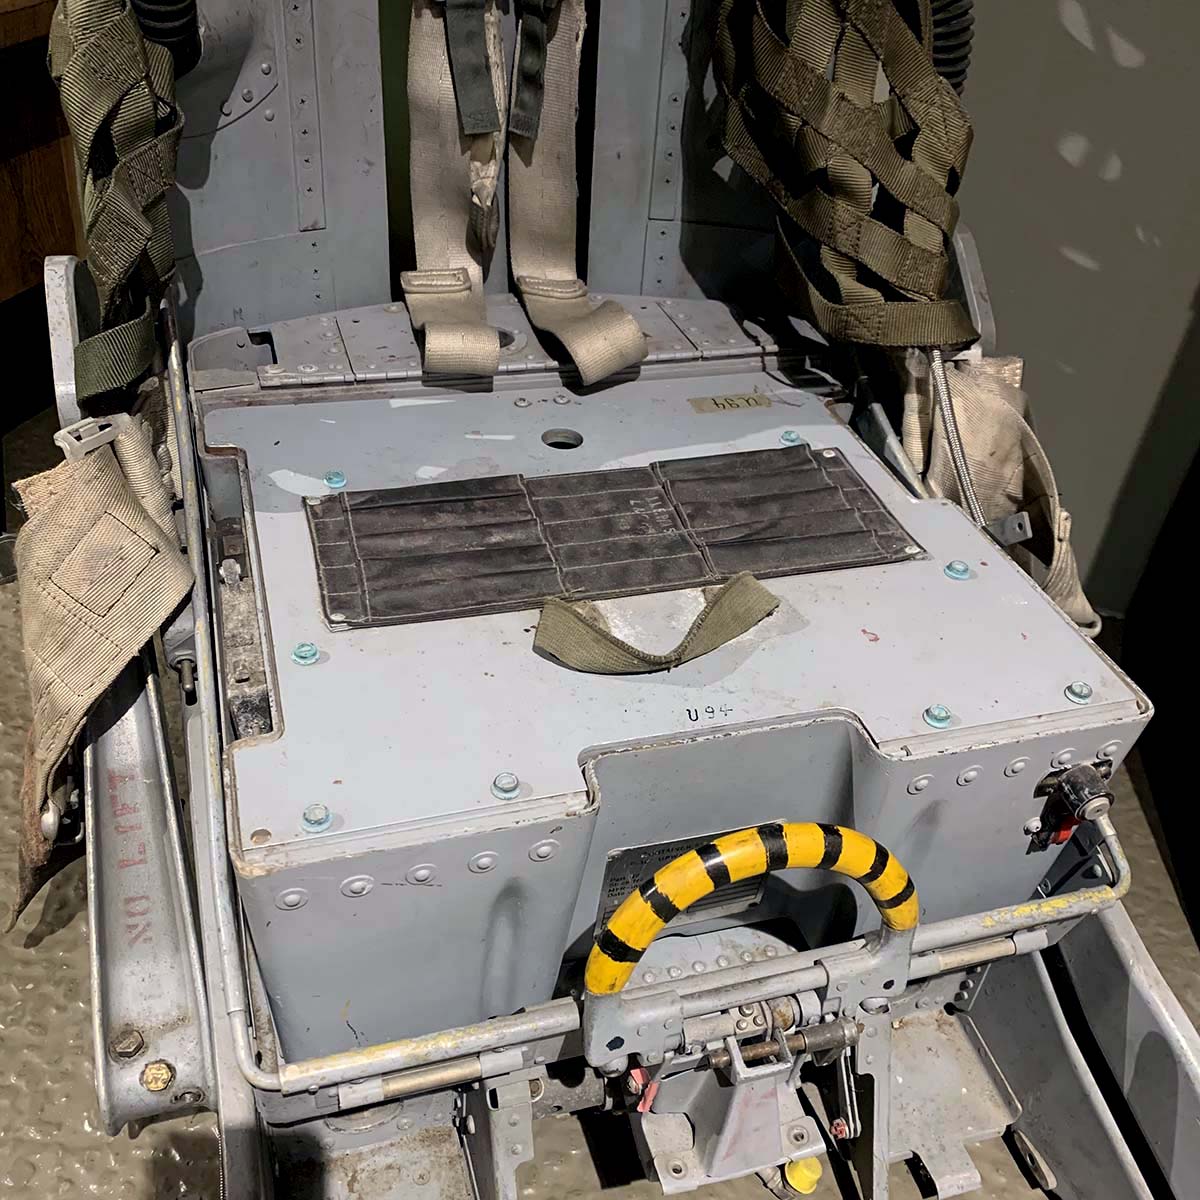 Survival equipment pack in a Lockheed C2 ejection seat.